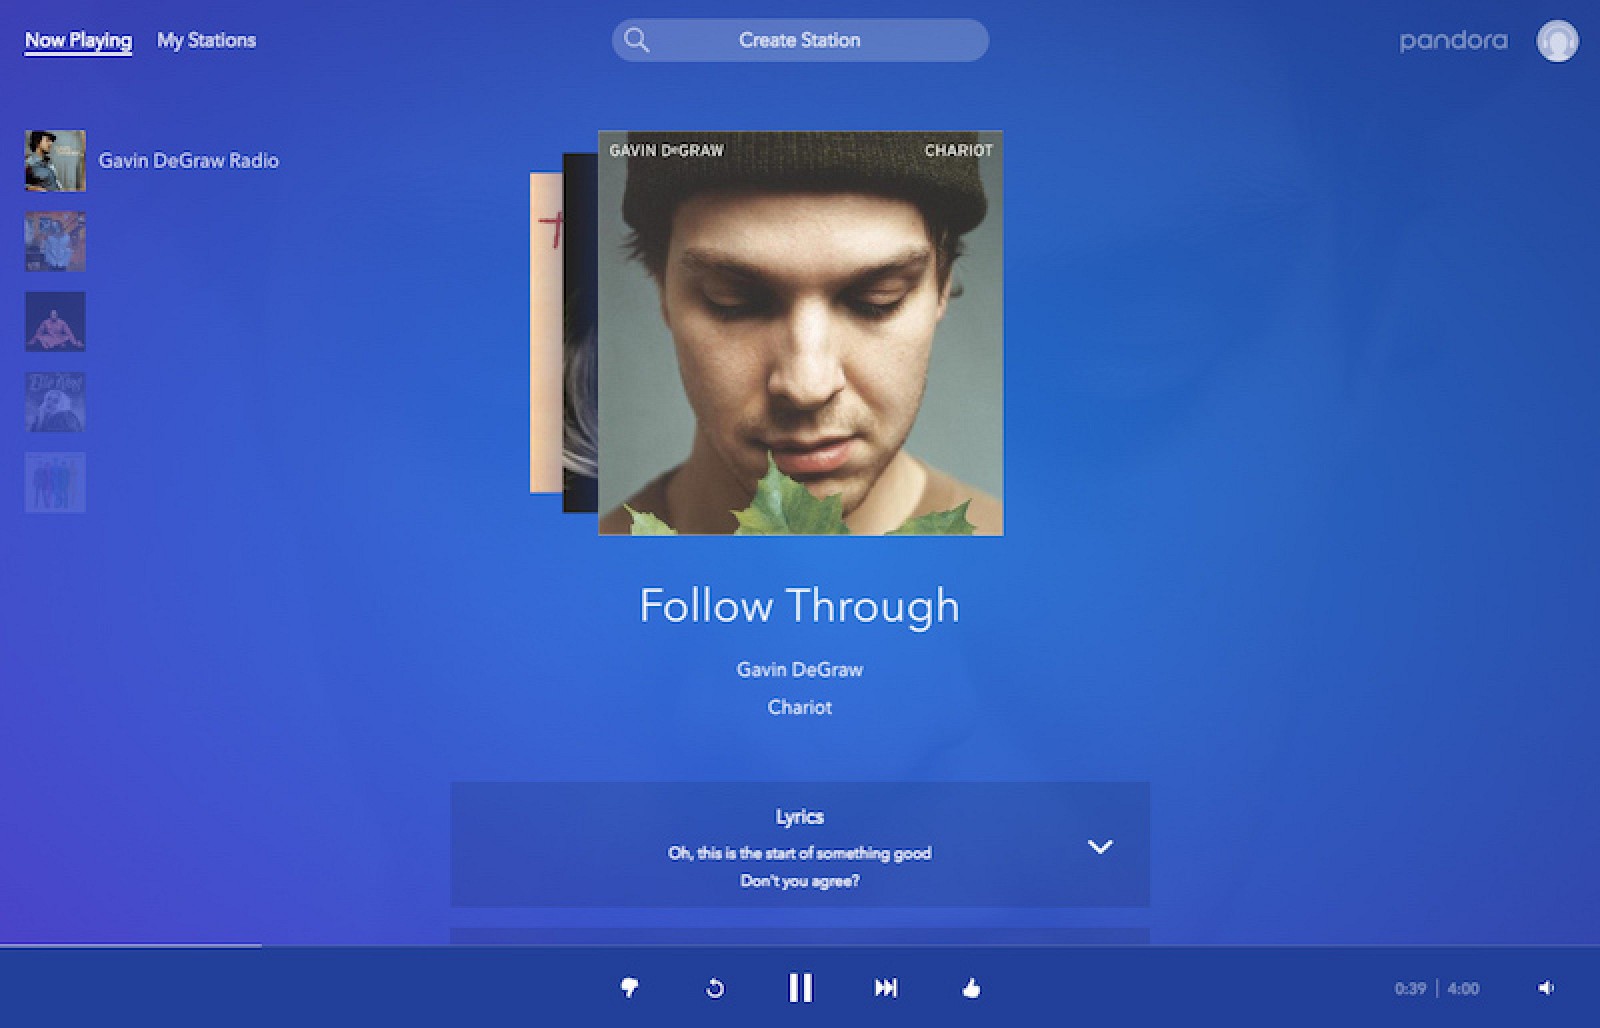 Pandora Redesigns Website With New UI and Premium Playback Features for